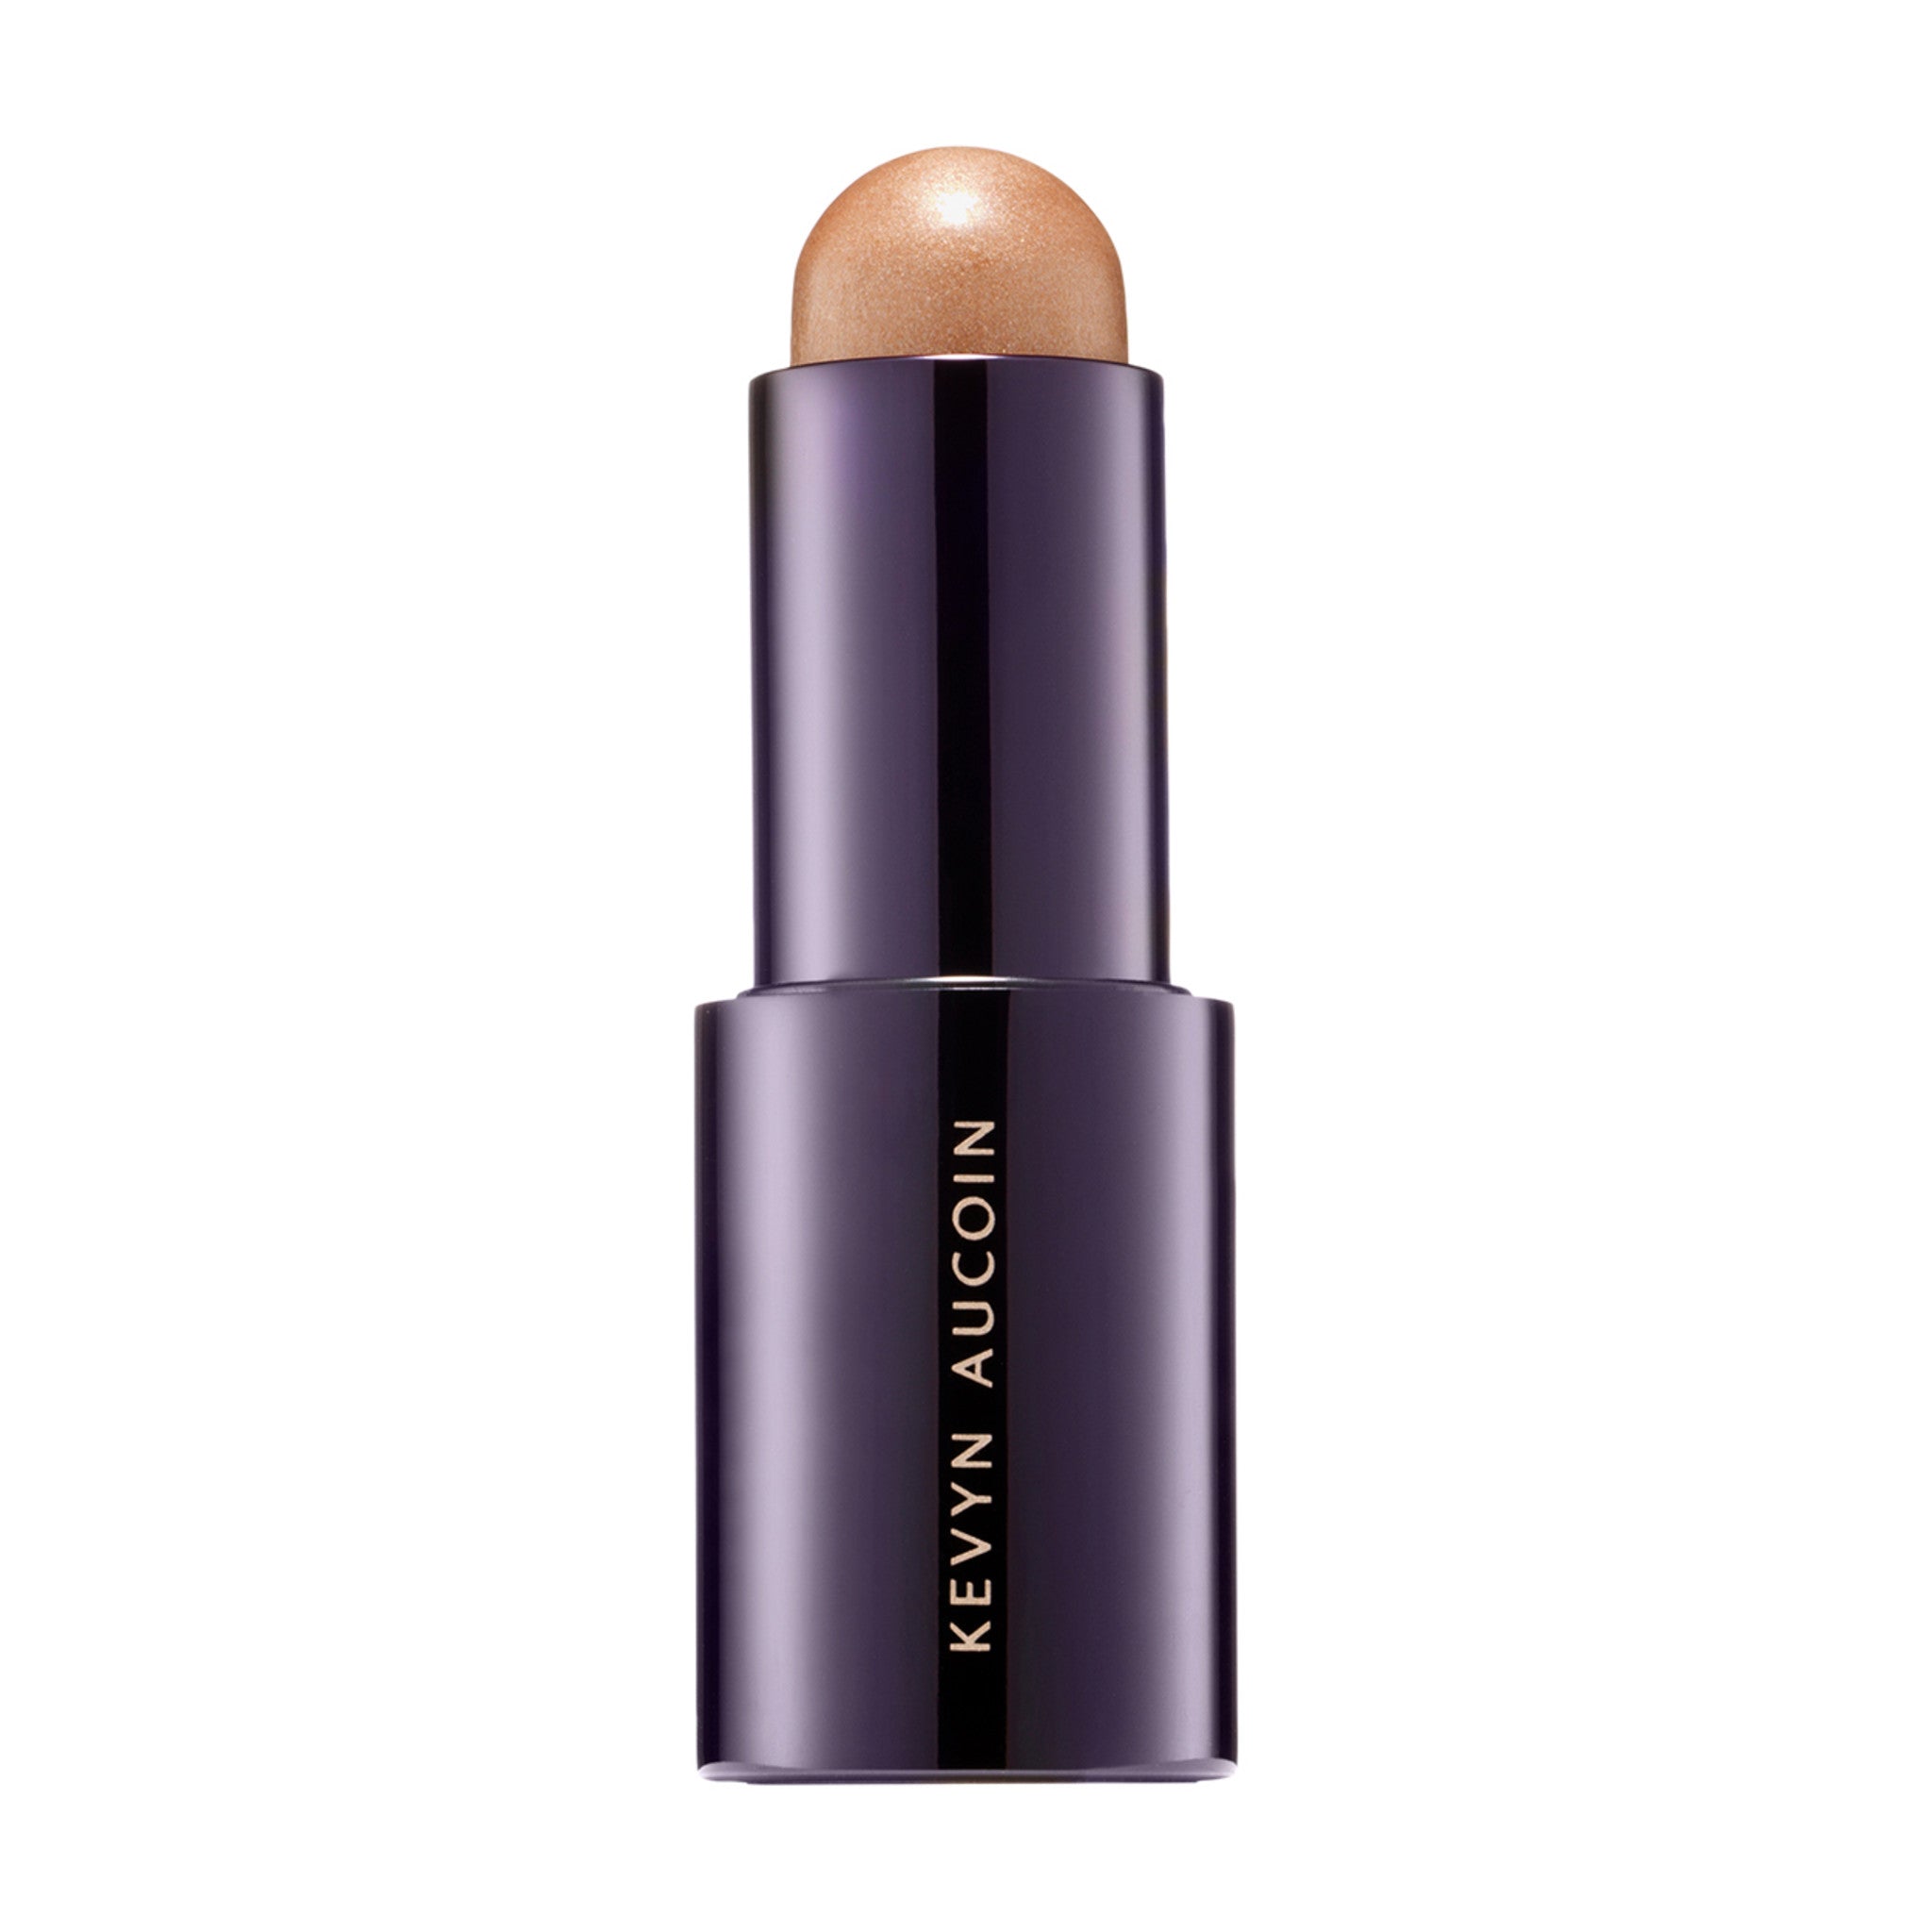 Kevyn Aucoin The Lighting Stick Color/Shade variant: Soft Light main image.